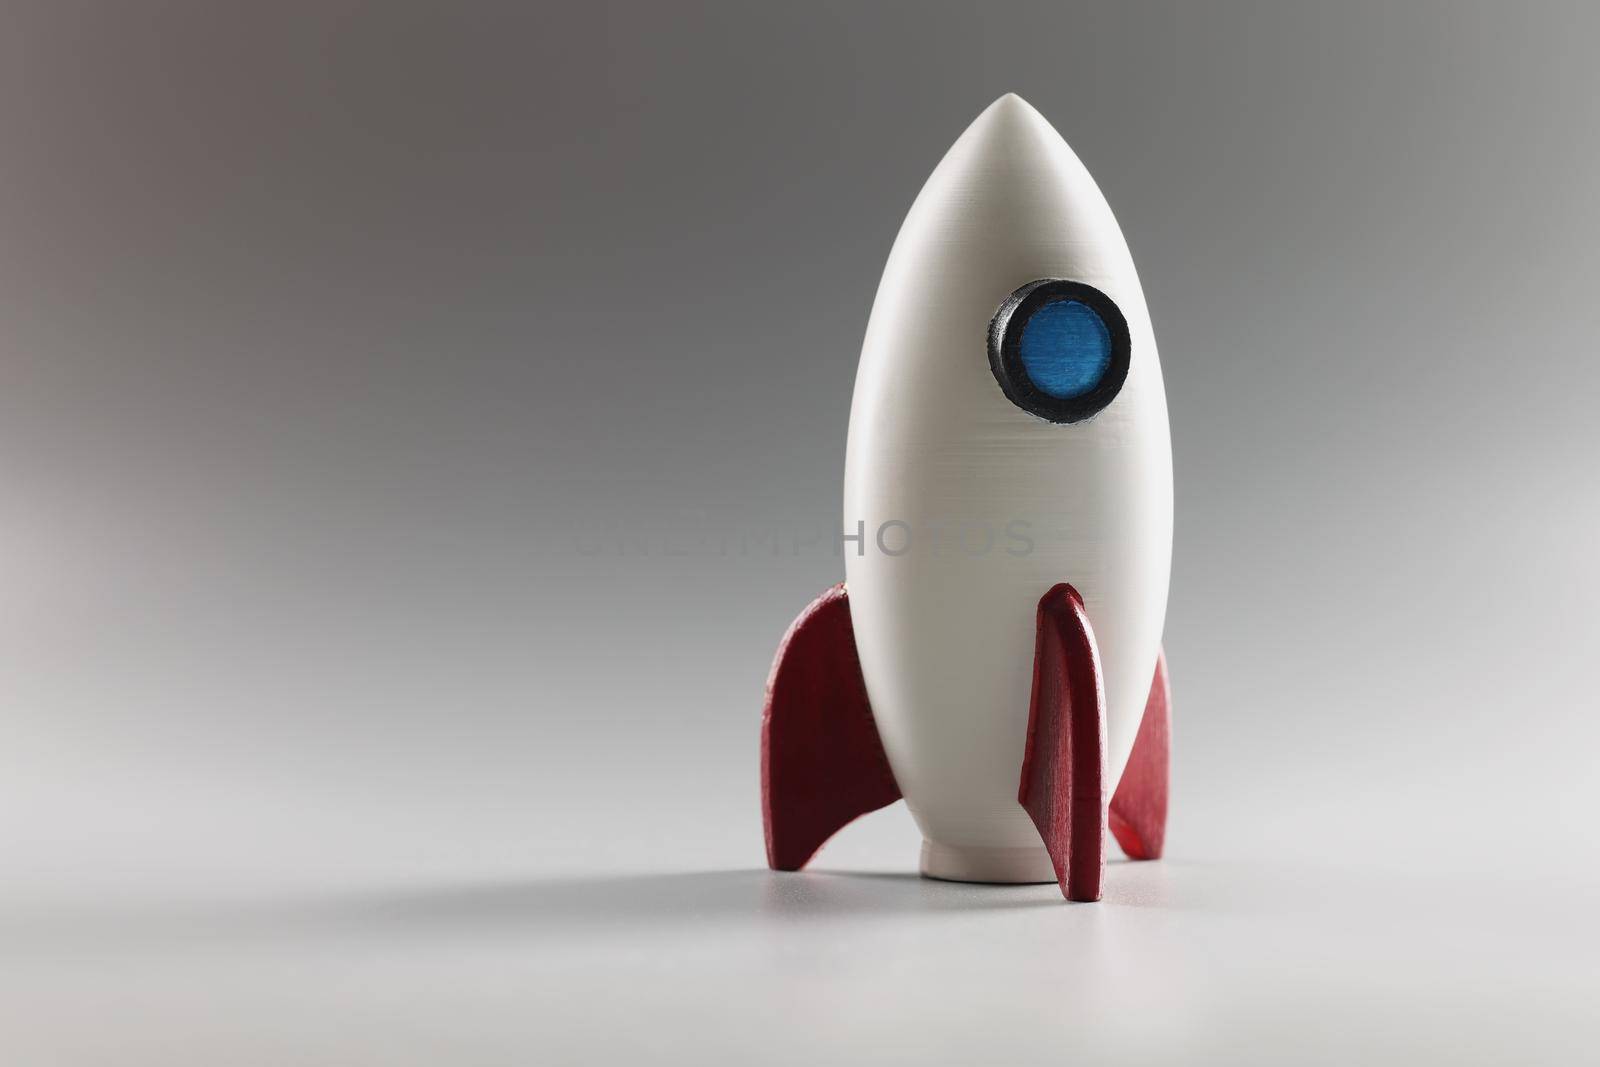 Close-up of miniature rocket toy stand on surface, rocketship as symbol for business project and startup. Success, development, growth concept. Copy space